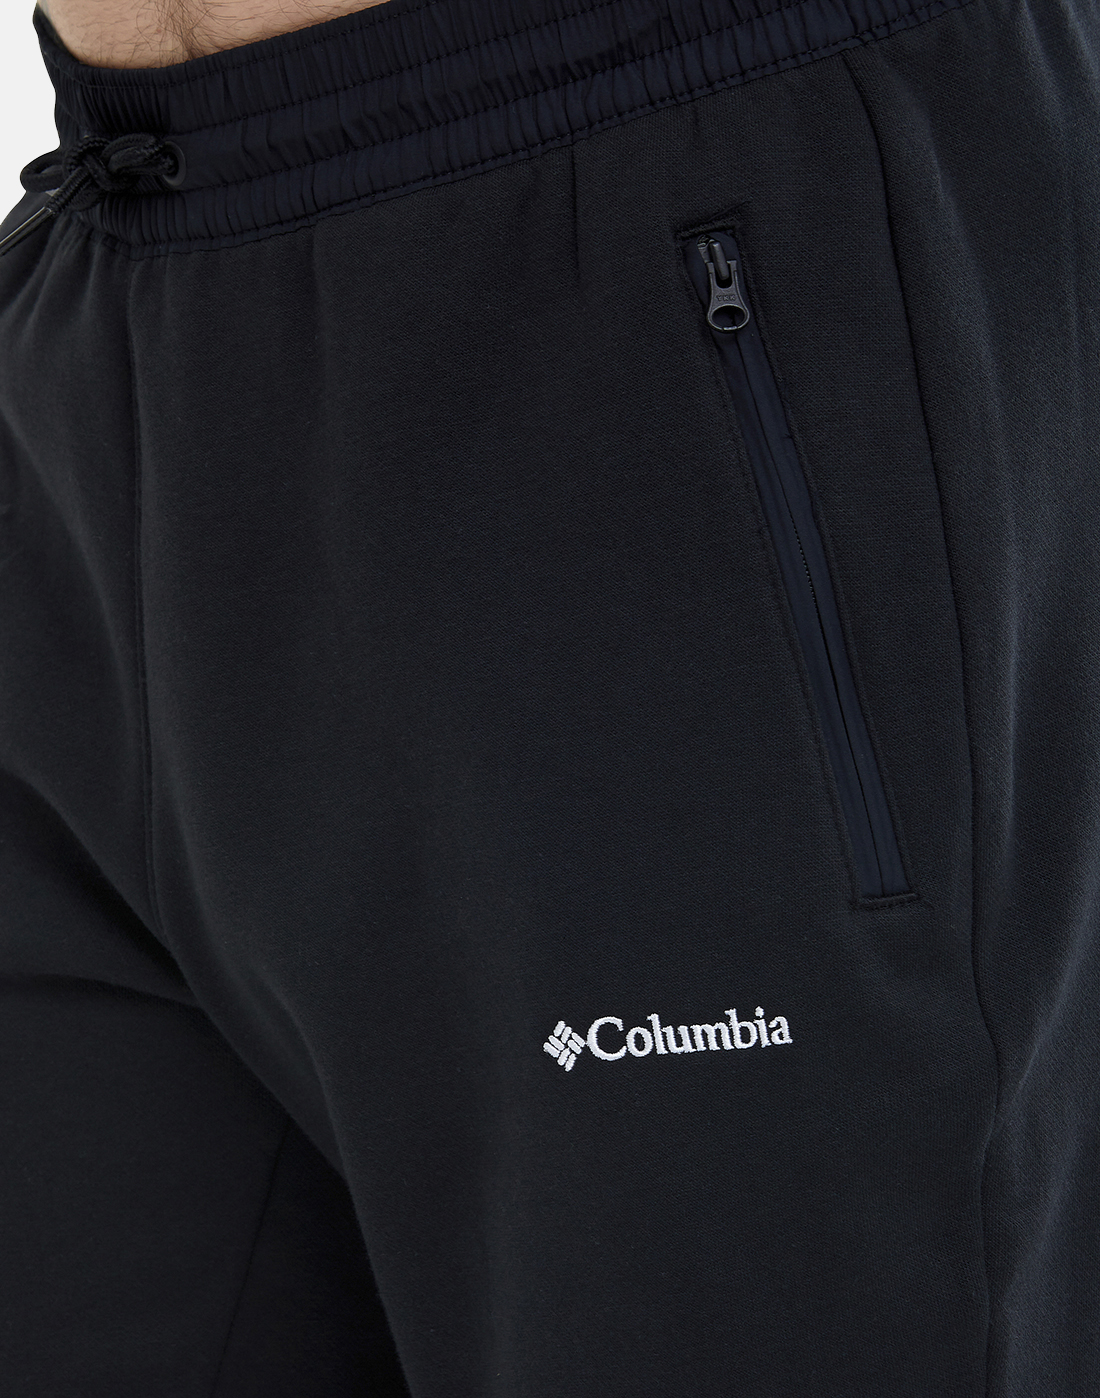 Columbia Mens Freemont Pants - Black | Life Style Sports IE